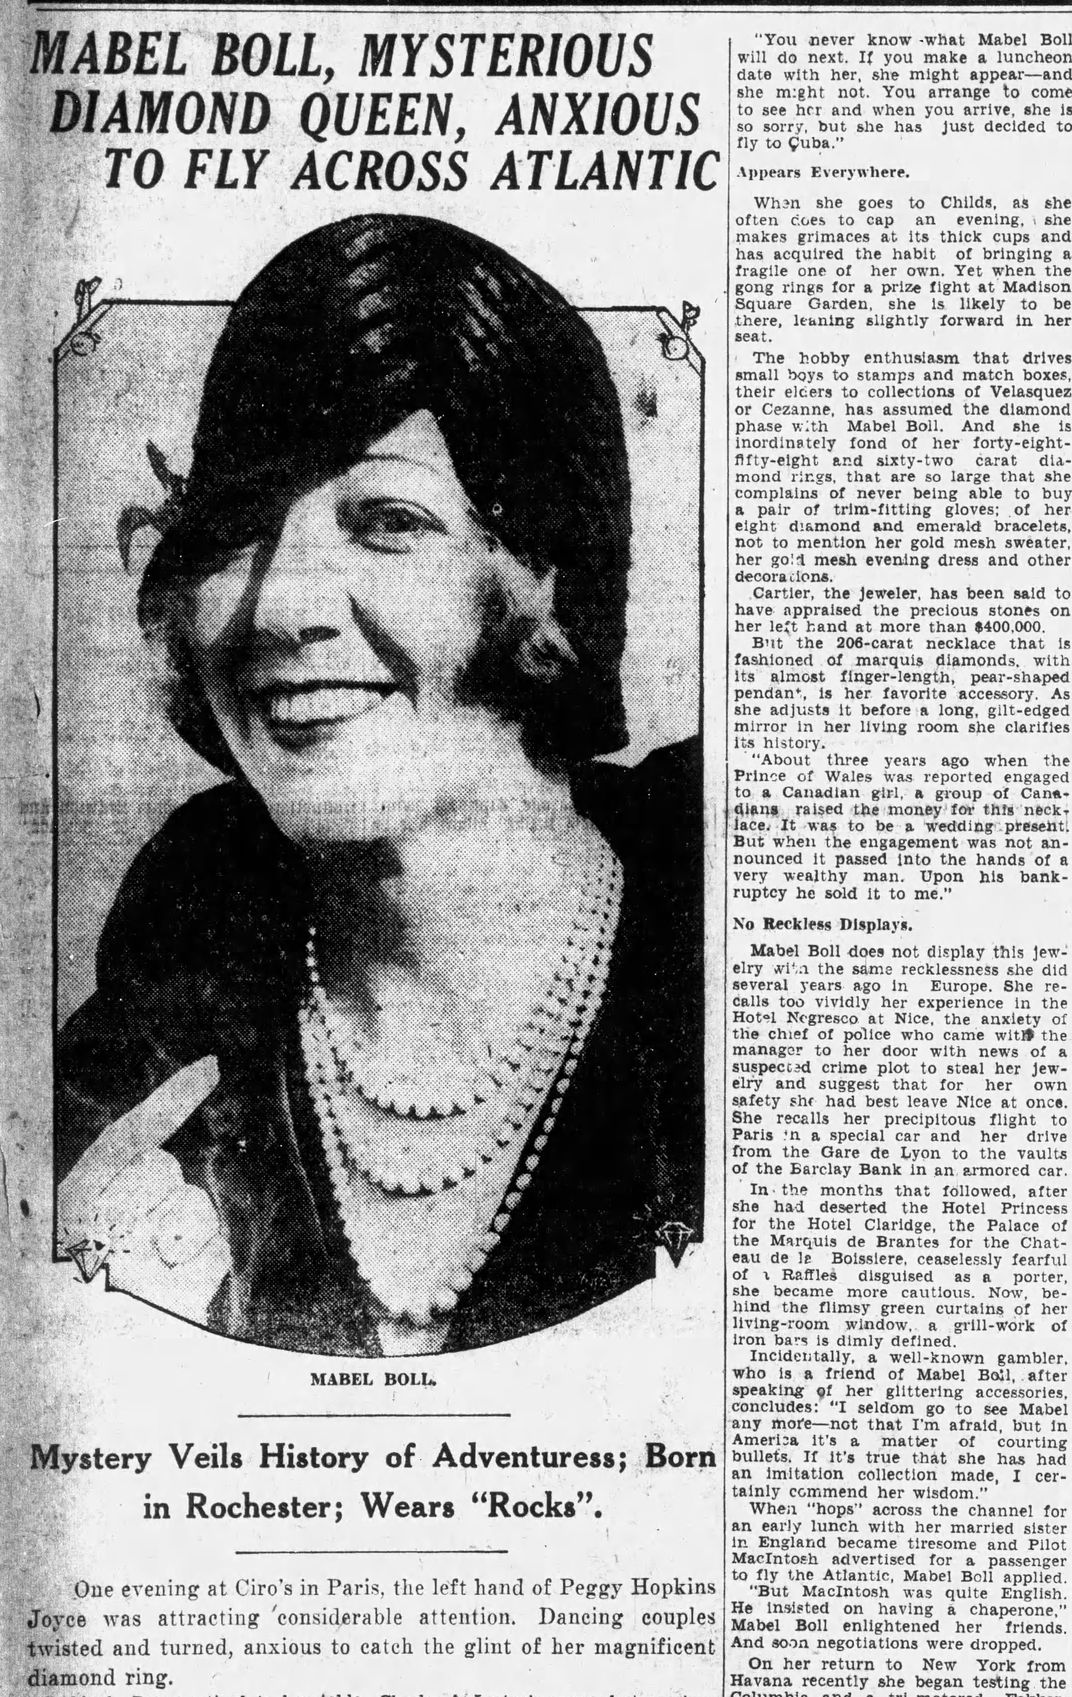 An April 1928 newspaper article about Boll